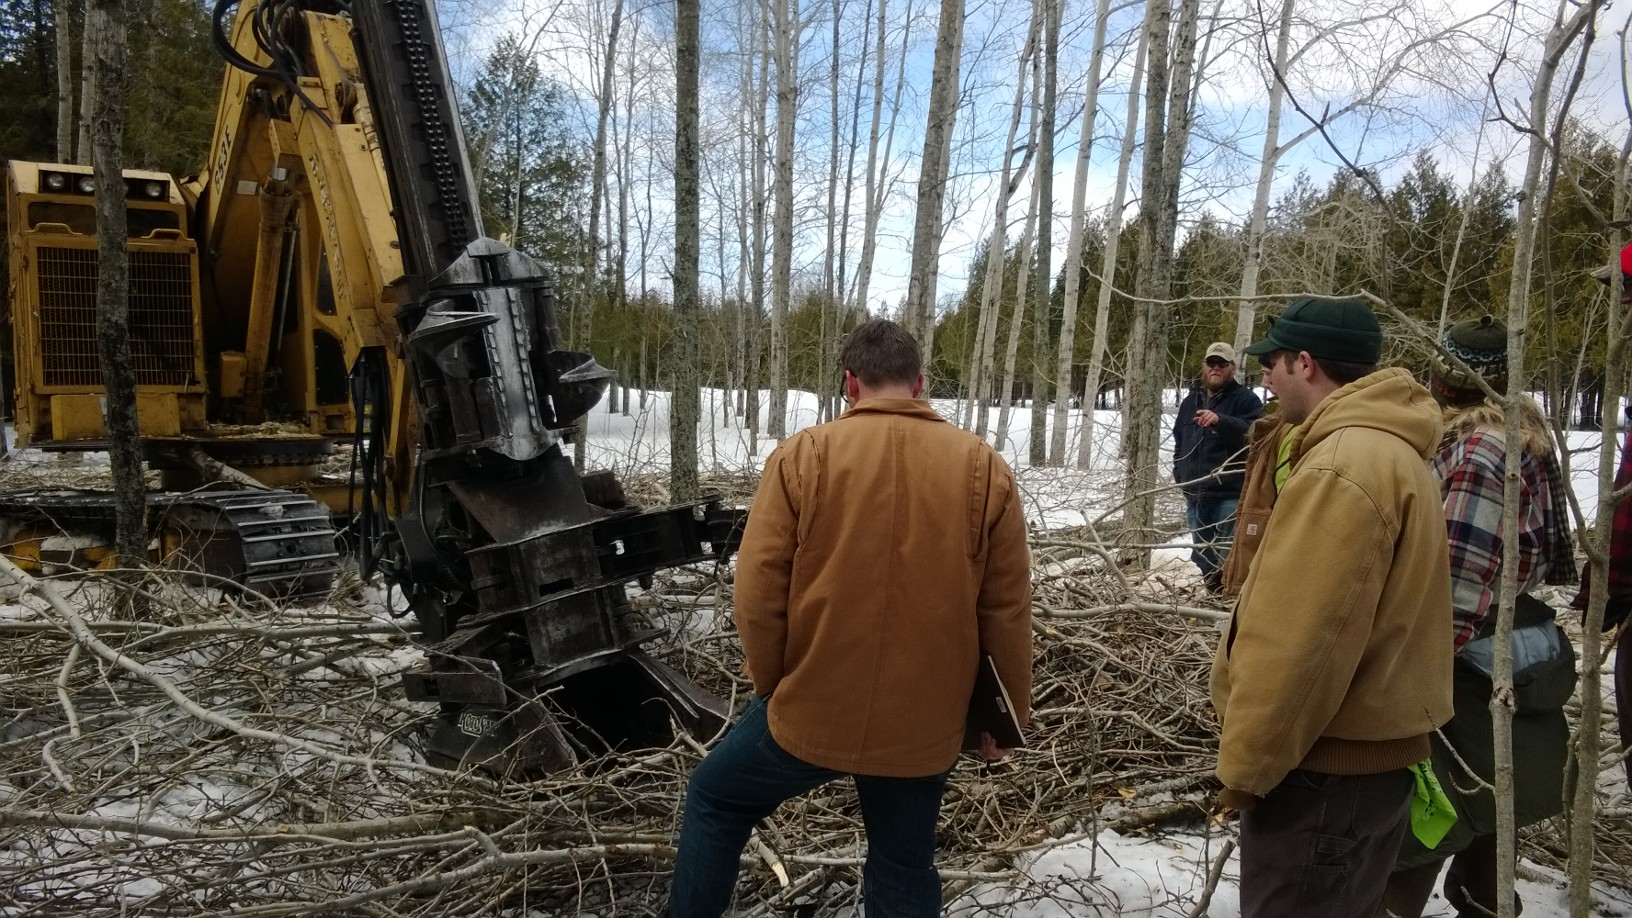  FAP foresters on volume harvest training site